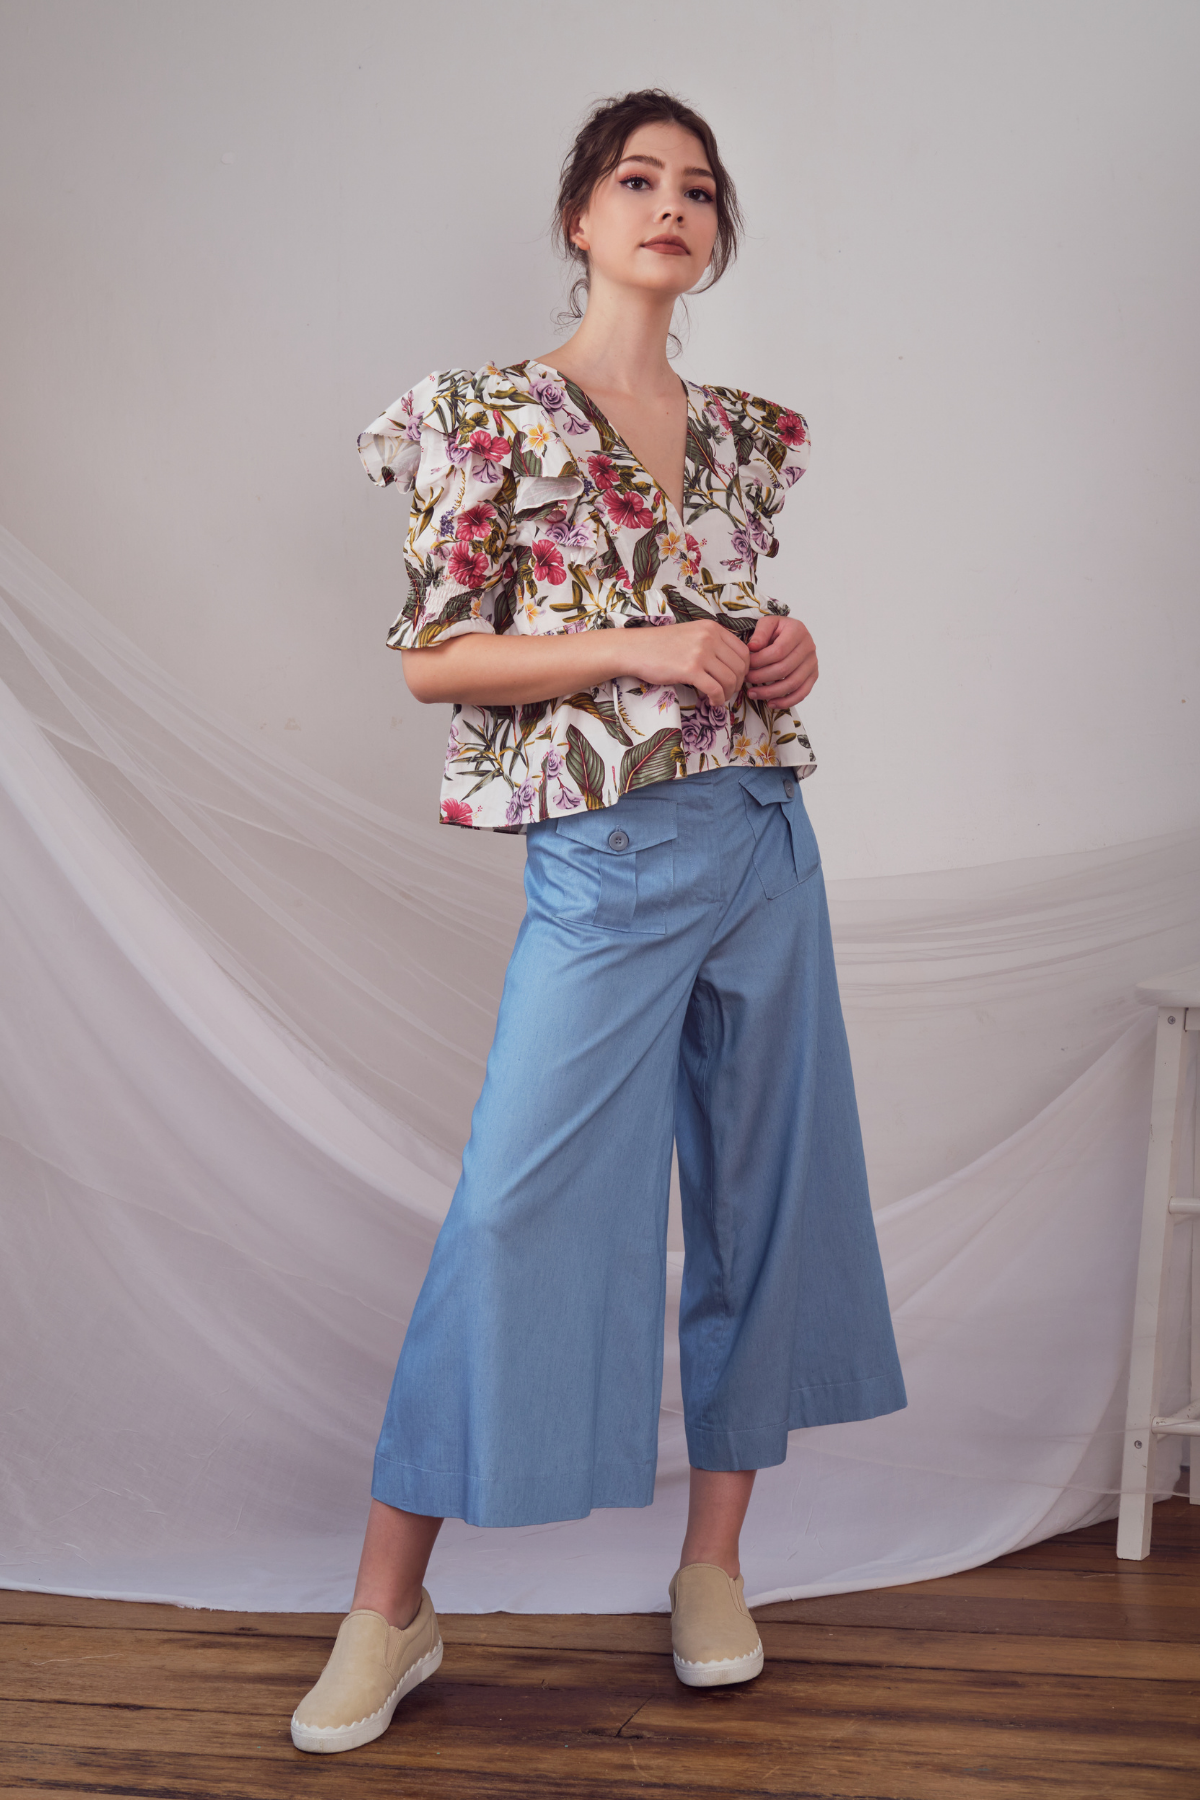 Lily & Lou Kirby Top in Floral, Women's Fashion